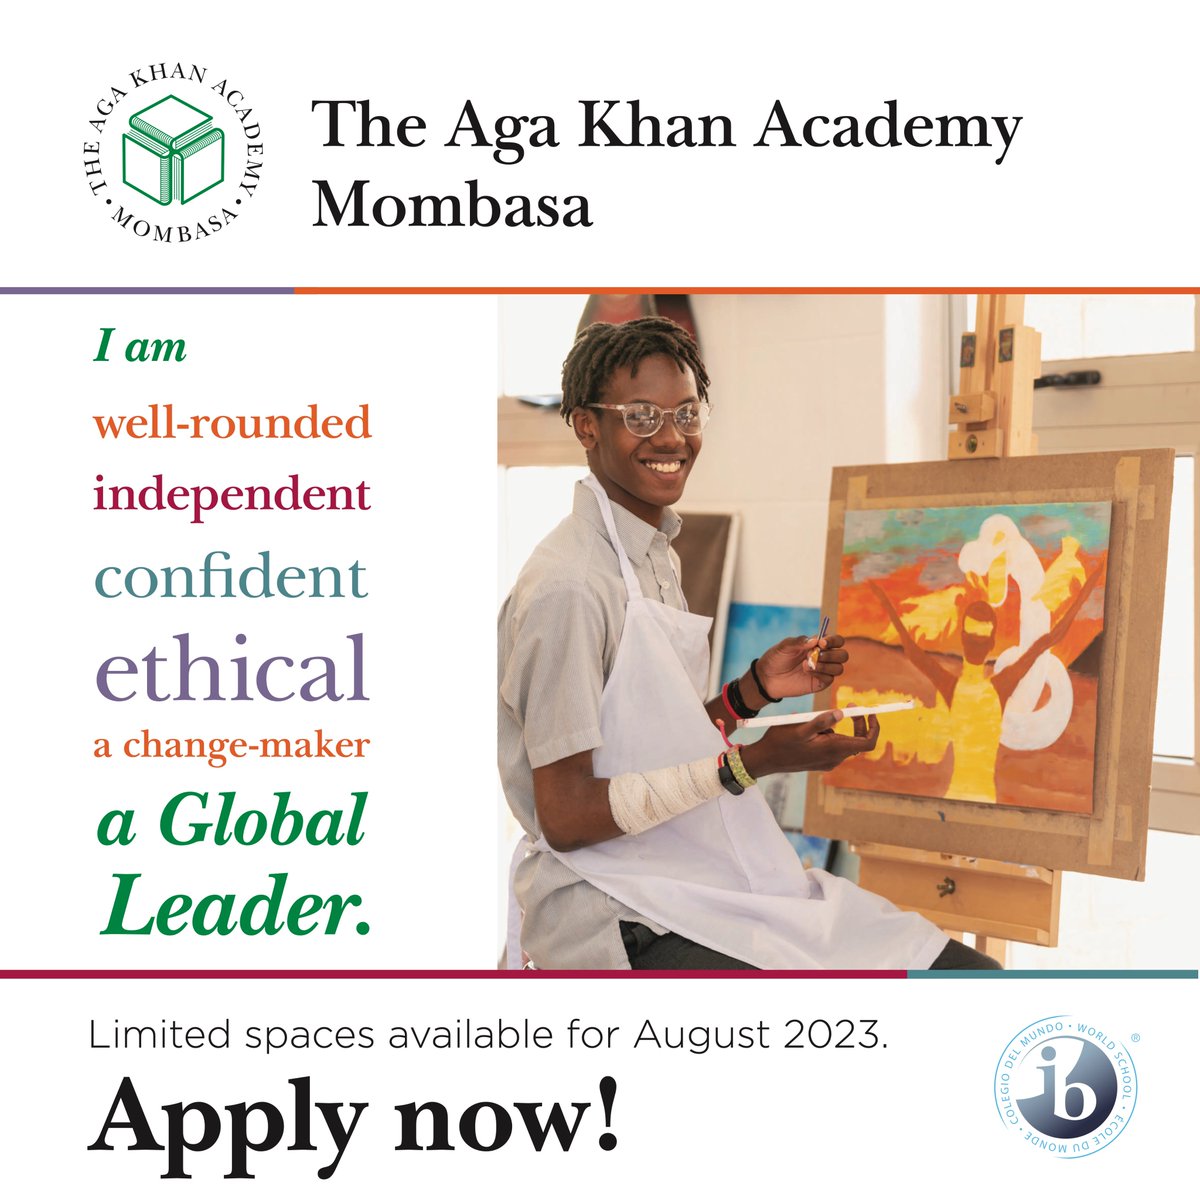 The Aga Khan Academy Mombasa is committed to excellence in education.

Fill in the form to apply; lnkd.in/d3QP5xBy

#IBeducation #Excellenceineducation #AgaKhanAcademies #AKDN #AgaKhanSchools #AgaKhanAcademyMombasa #IBtogether